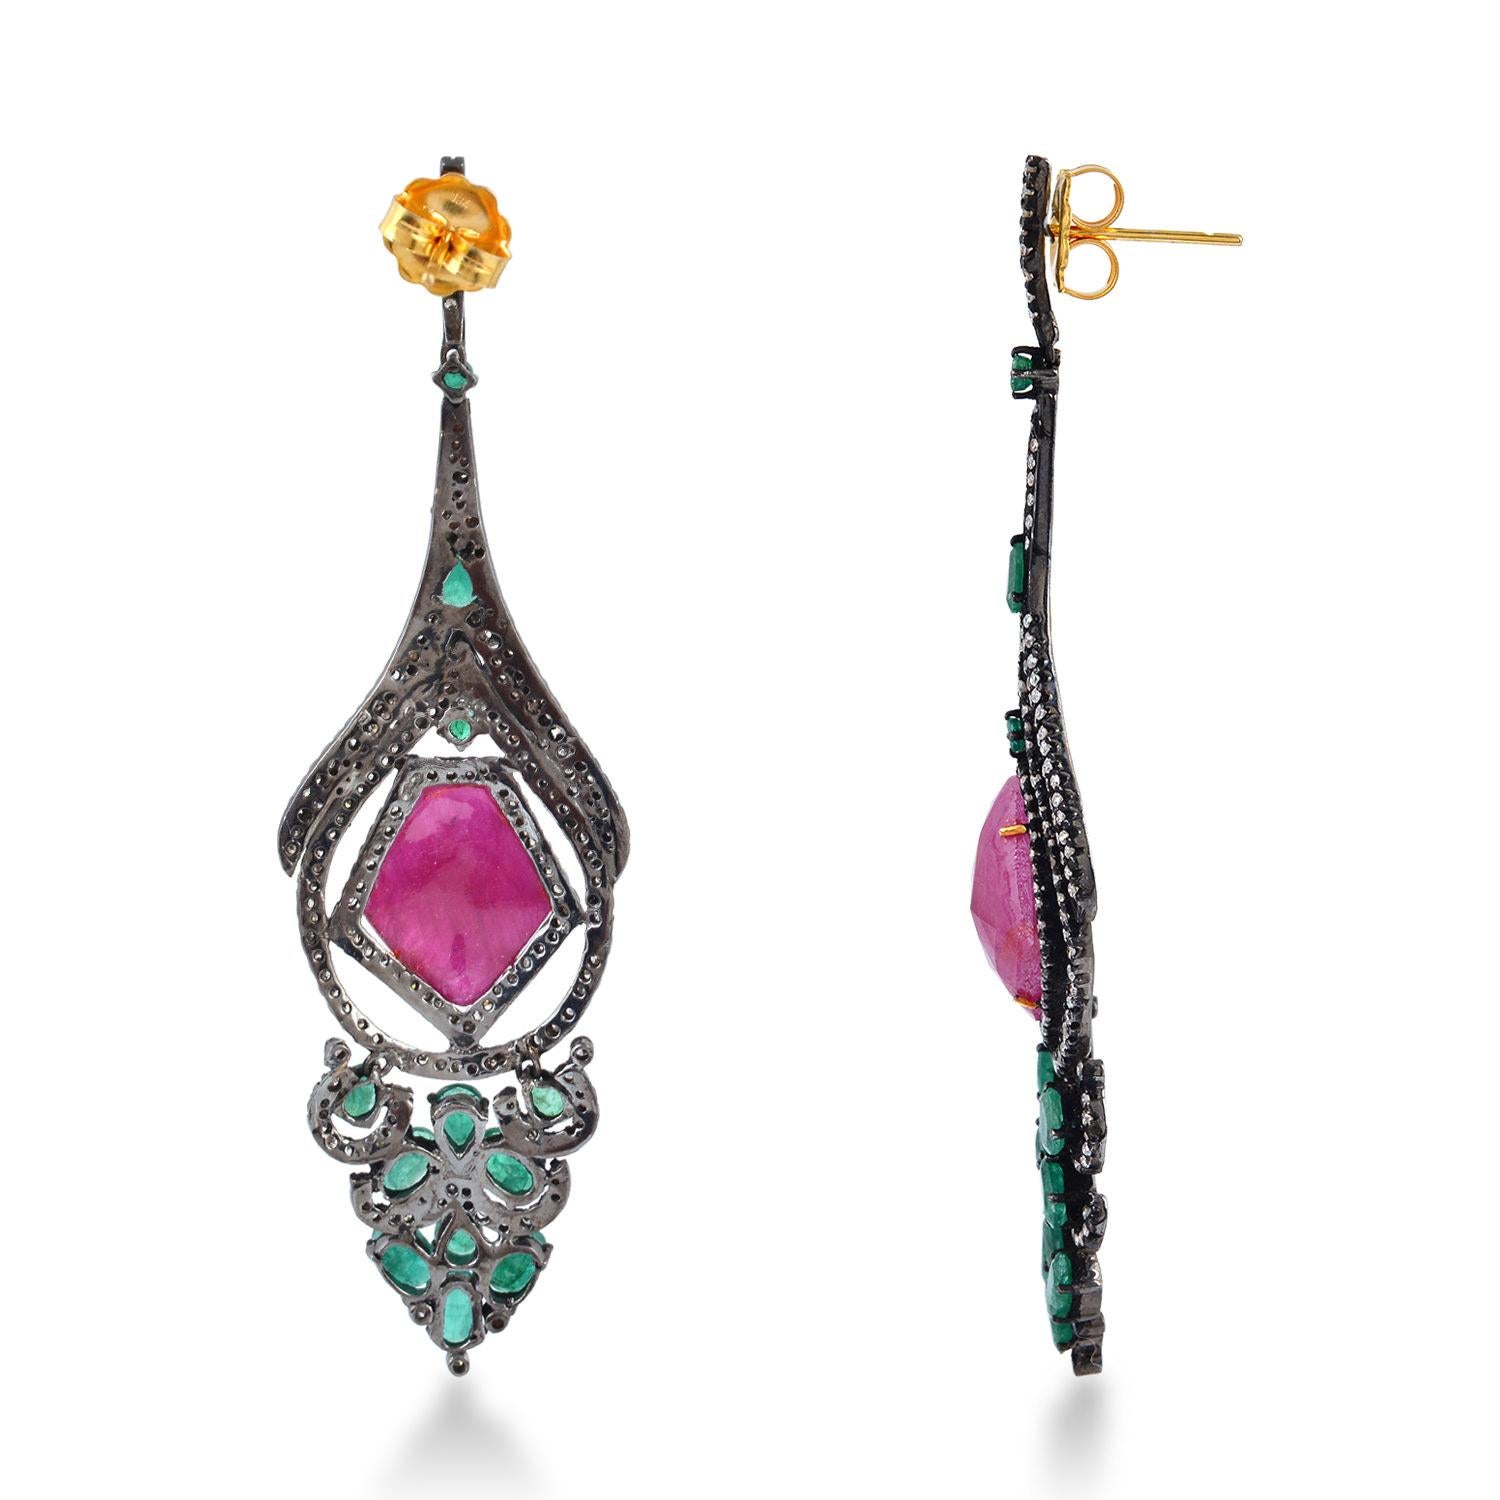 Ruby Emerald Designer Dangle Earring in 14KGold and Silver is pretty and very charming.

14Kt gold:2.15gms
Diamond:4.5cts
Silver:17.29gms
Emerald:7.74cts
Ruby:19.3cts
